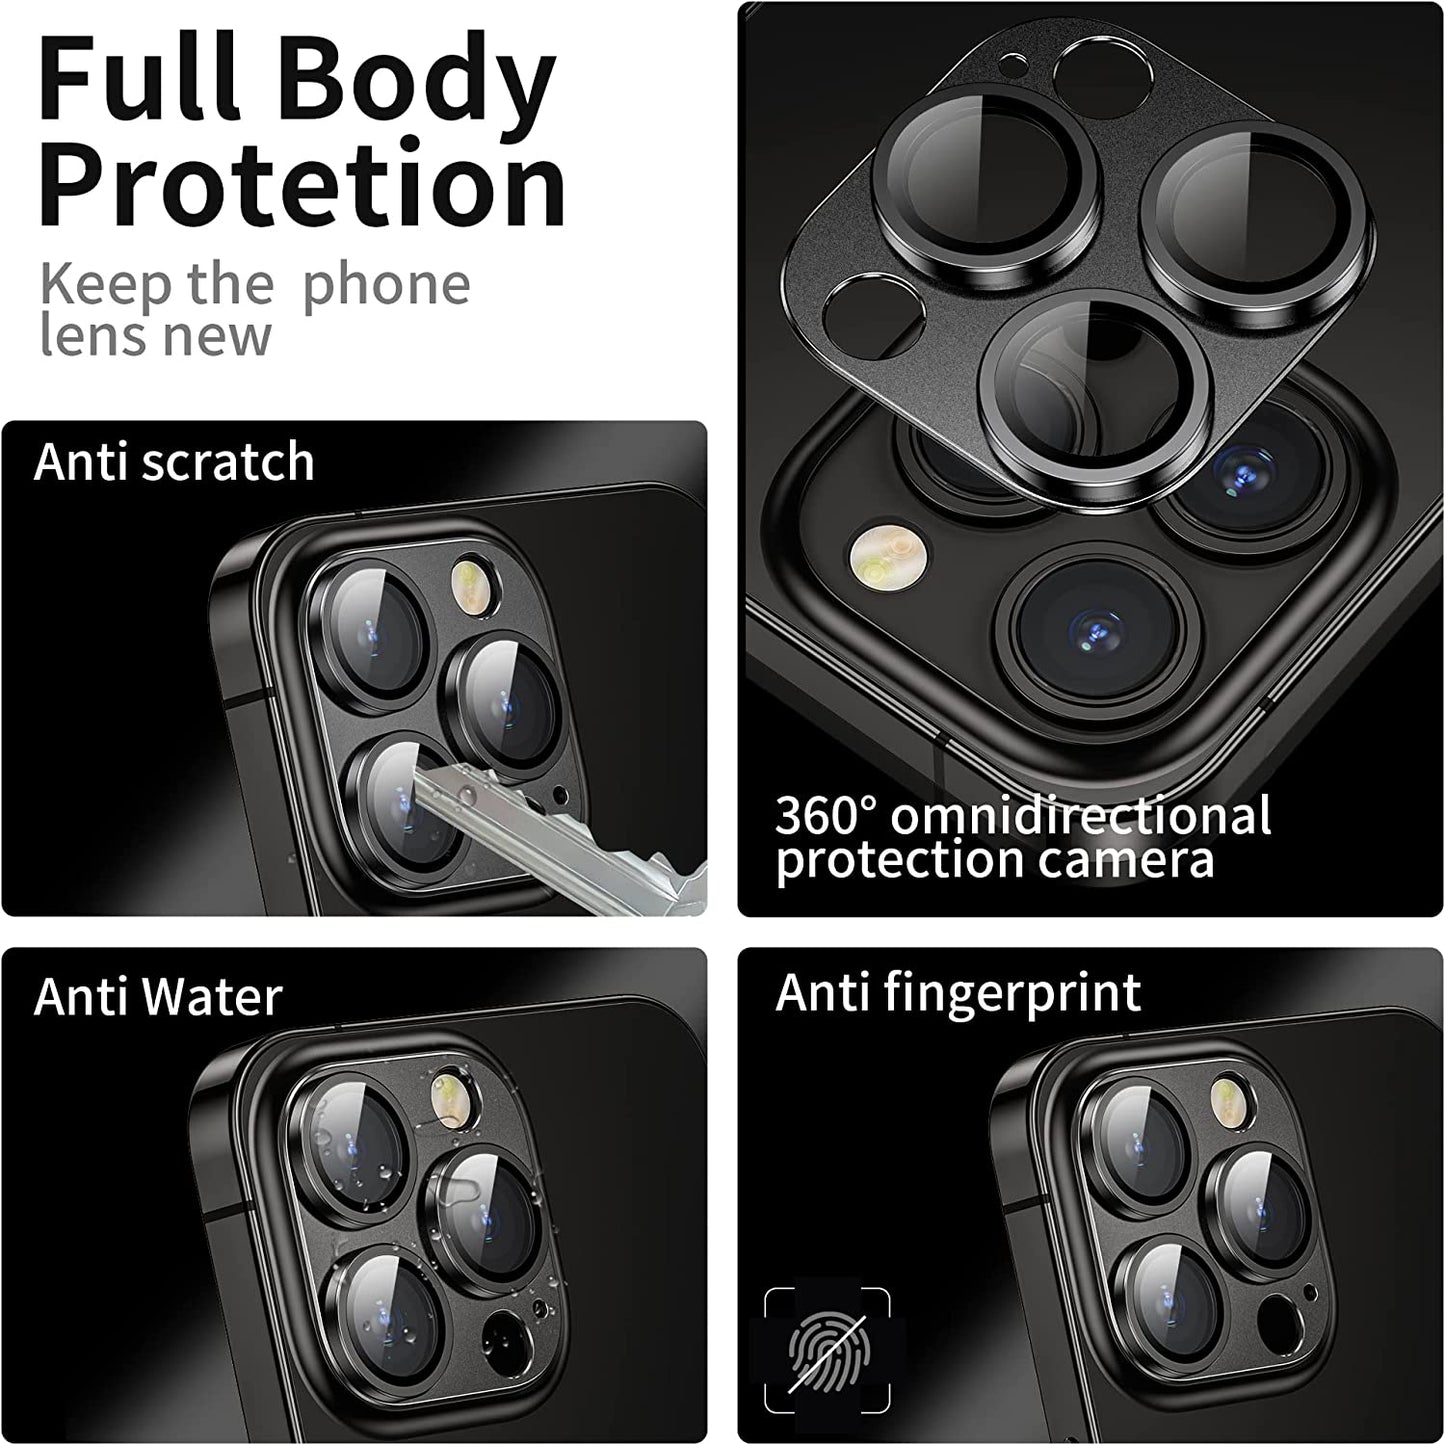 Mansoorr Camera Lens Protector for iPhone 14 Pro/iPhone 14 Pro Max -Space Black